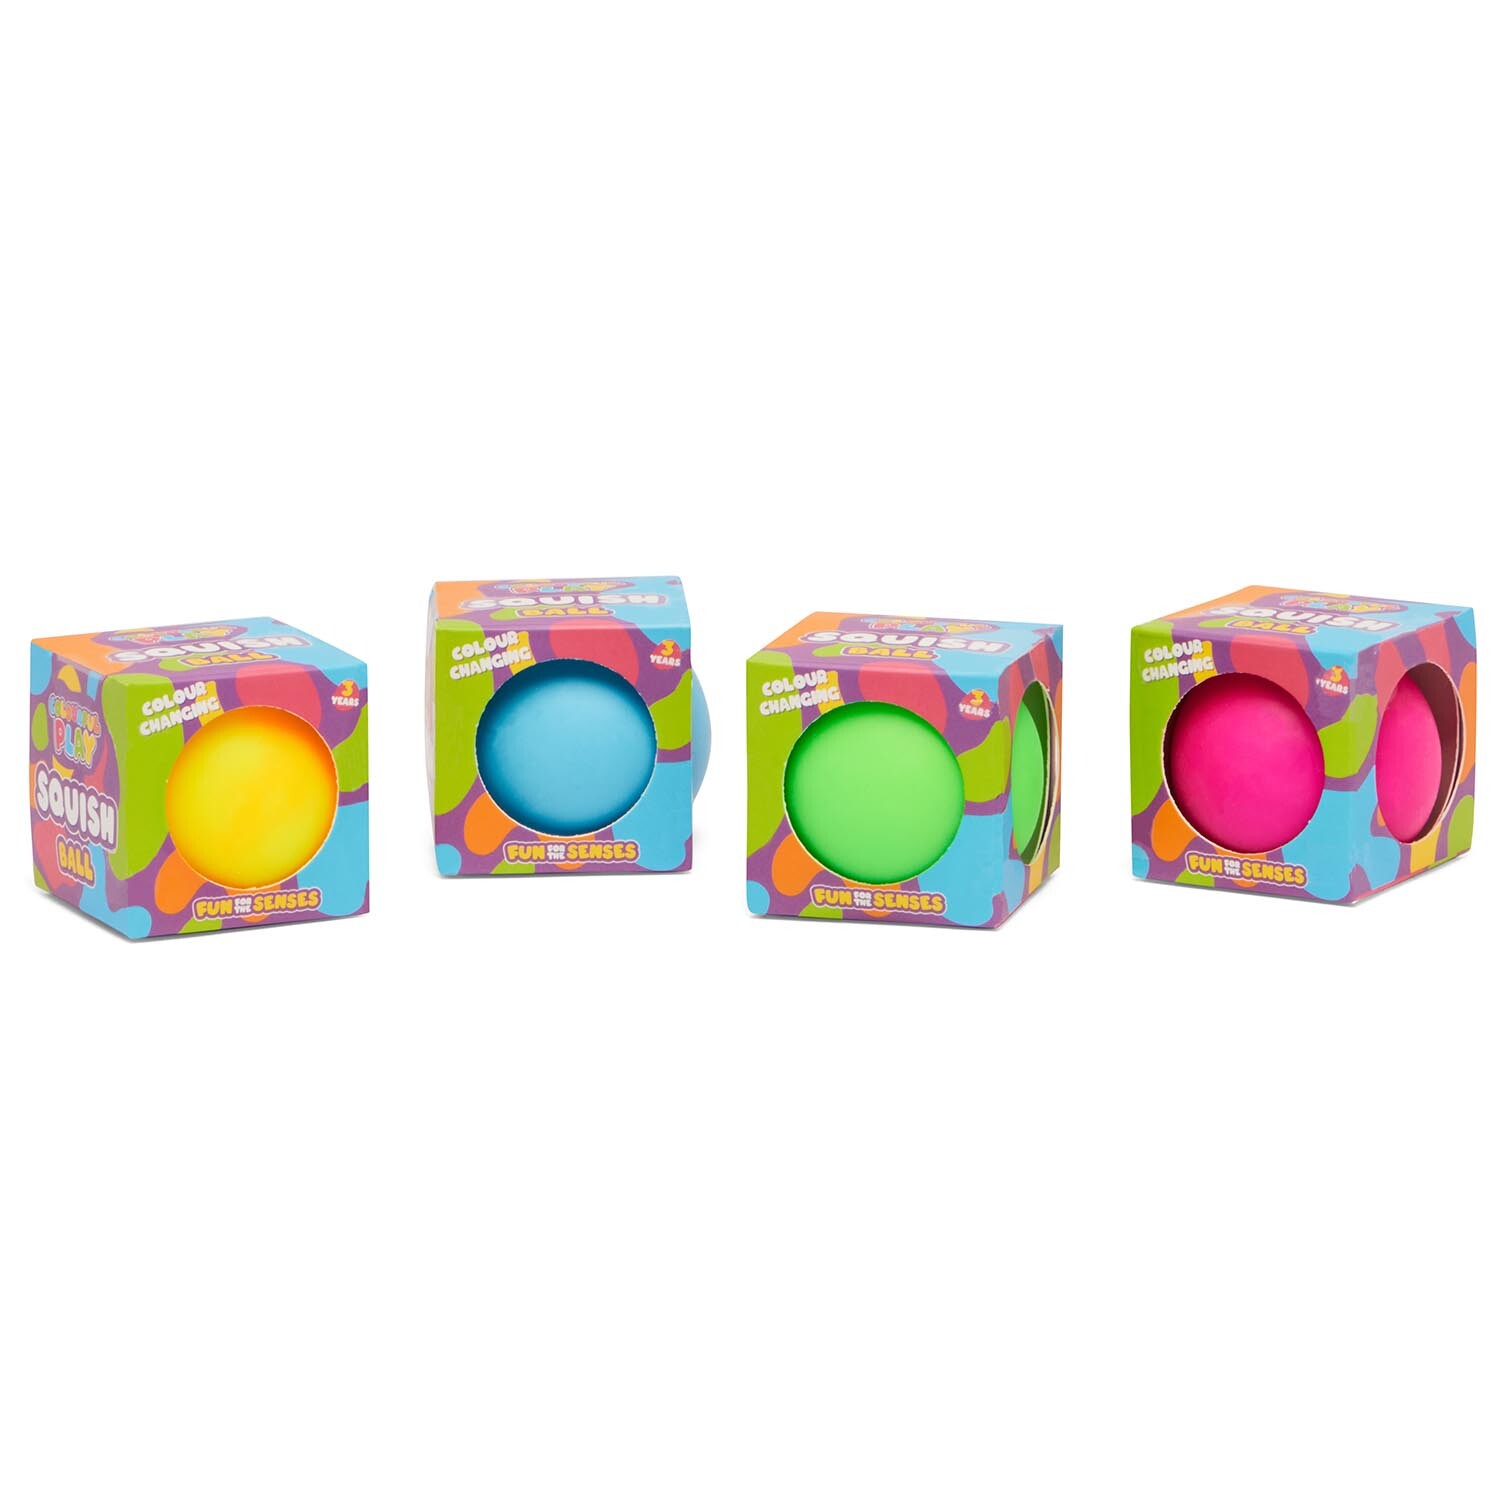 Single ToyMania Colour Changing Sensory Squish Ball in Assorted styles Image 10